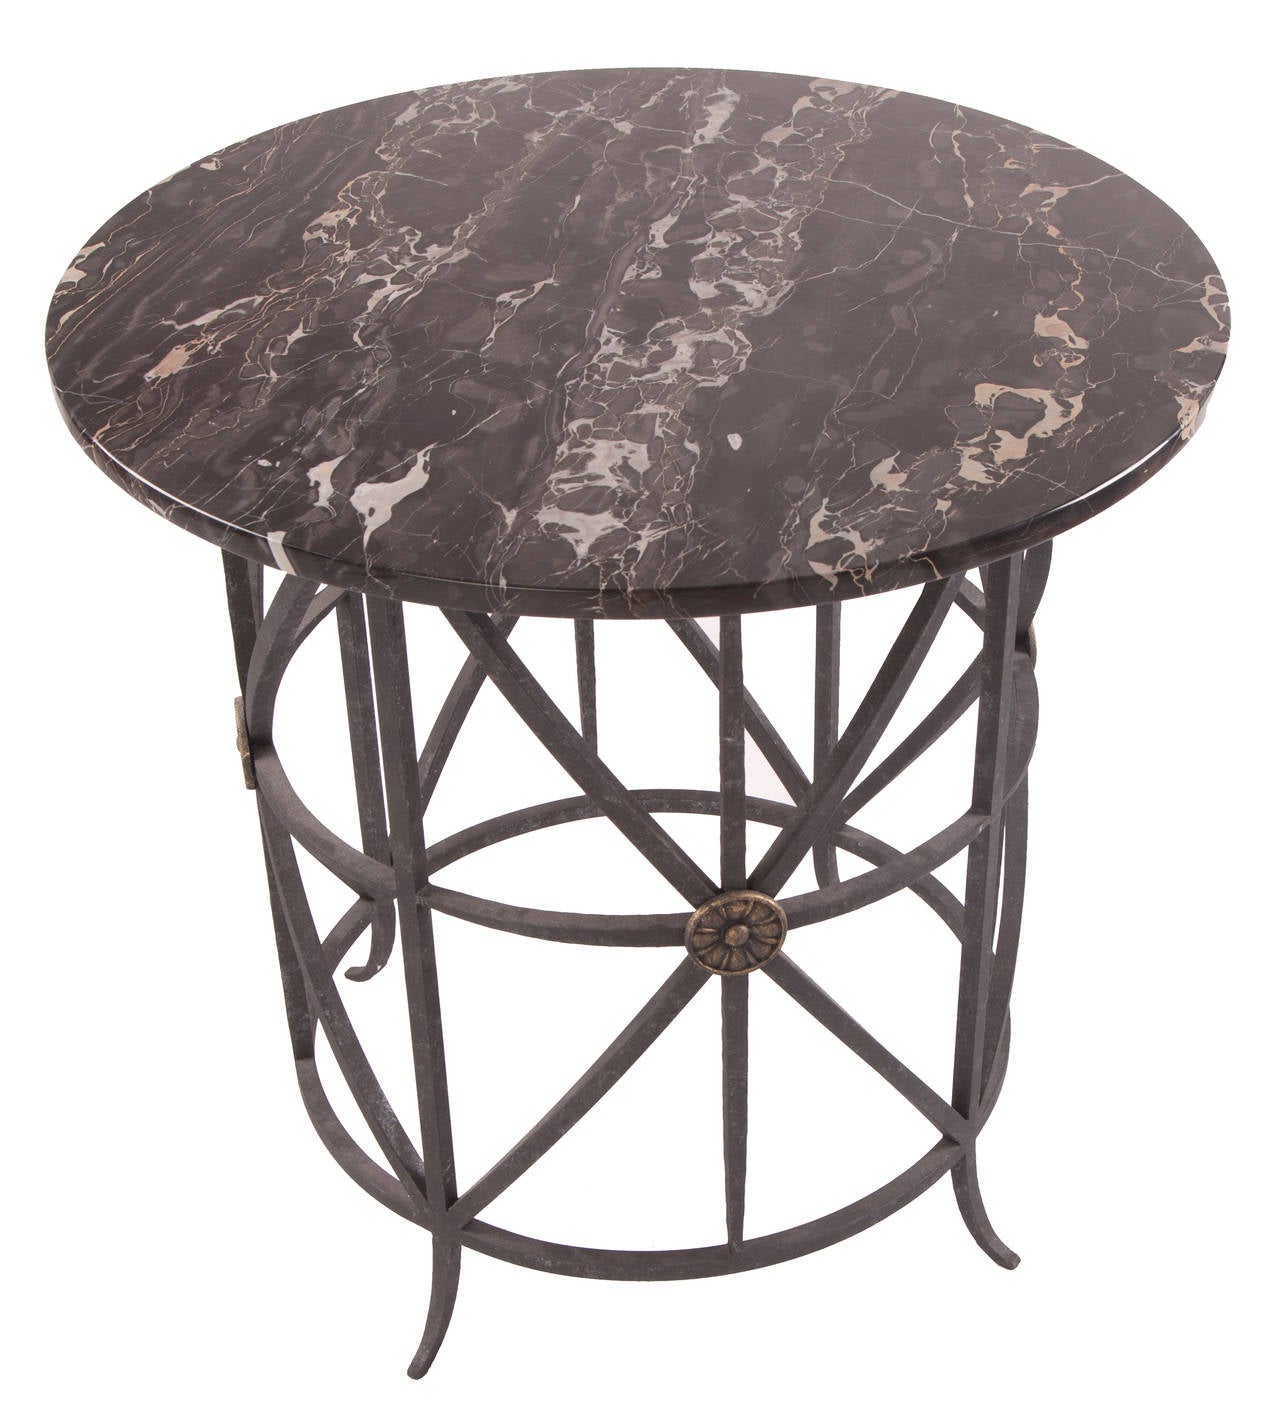 Beautiful black and white marble rounds on decoratively forged circular wrought iron tables with medallions. Excellent condition. Cocktail height.